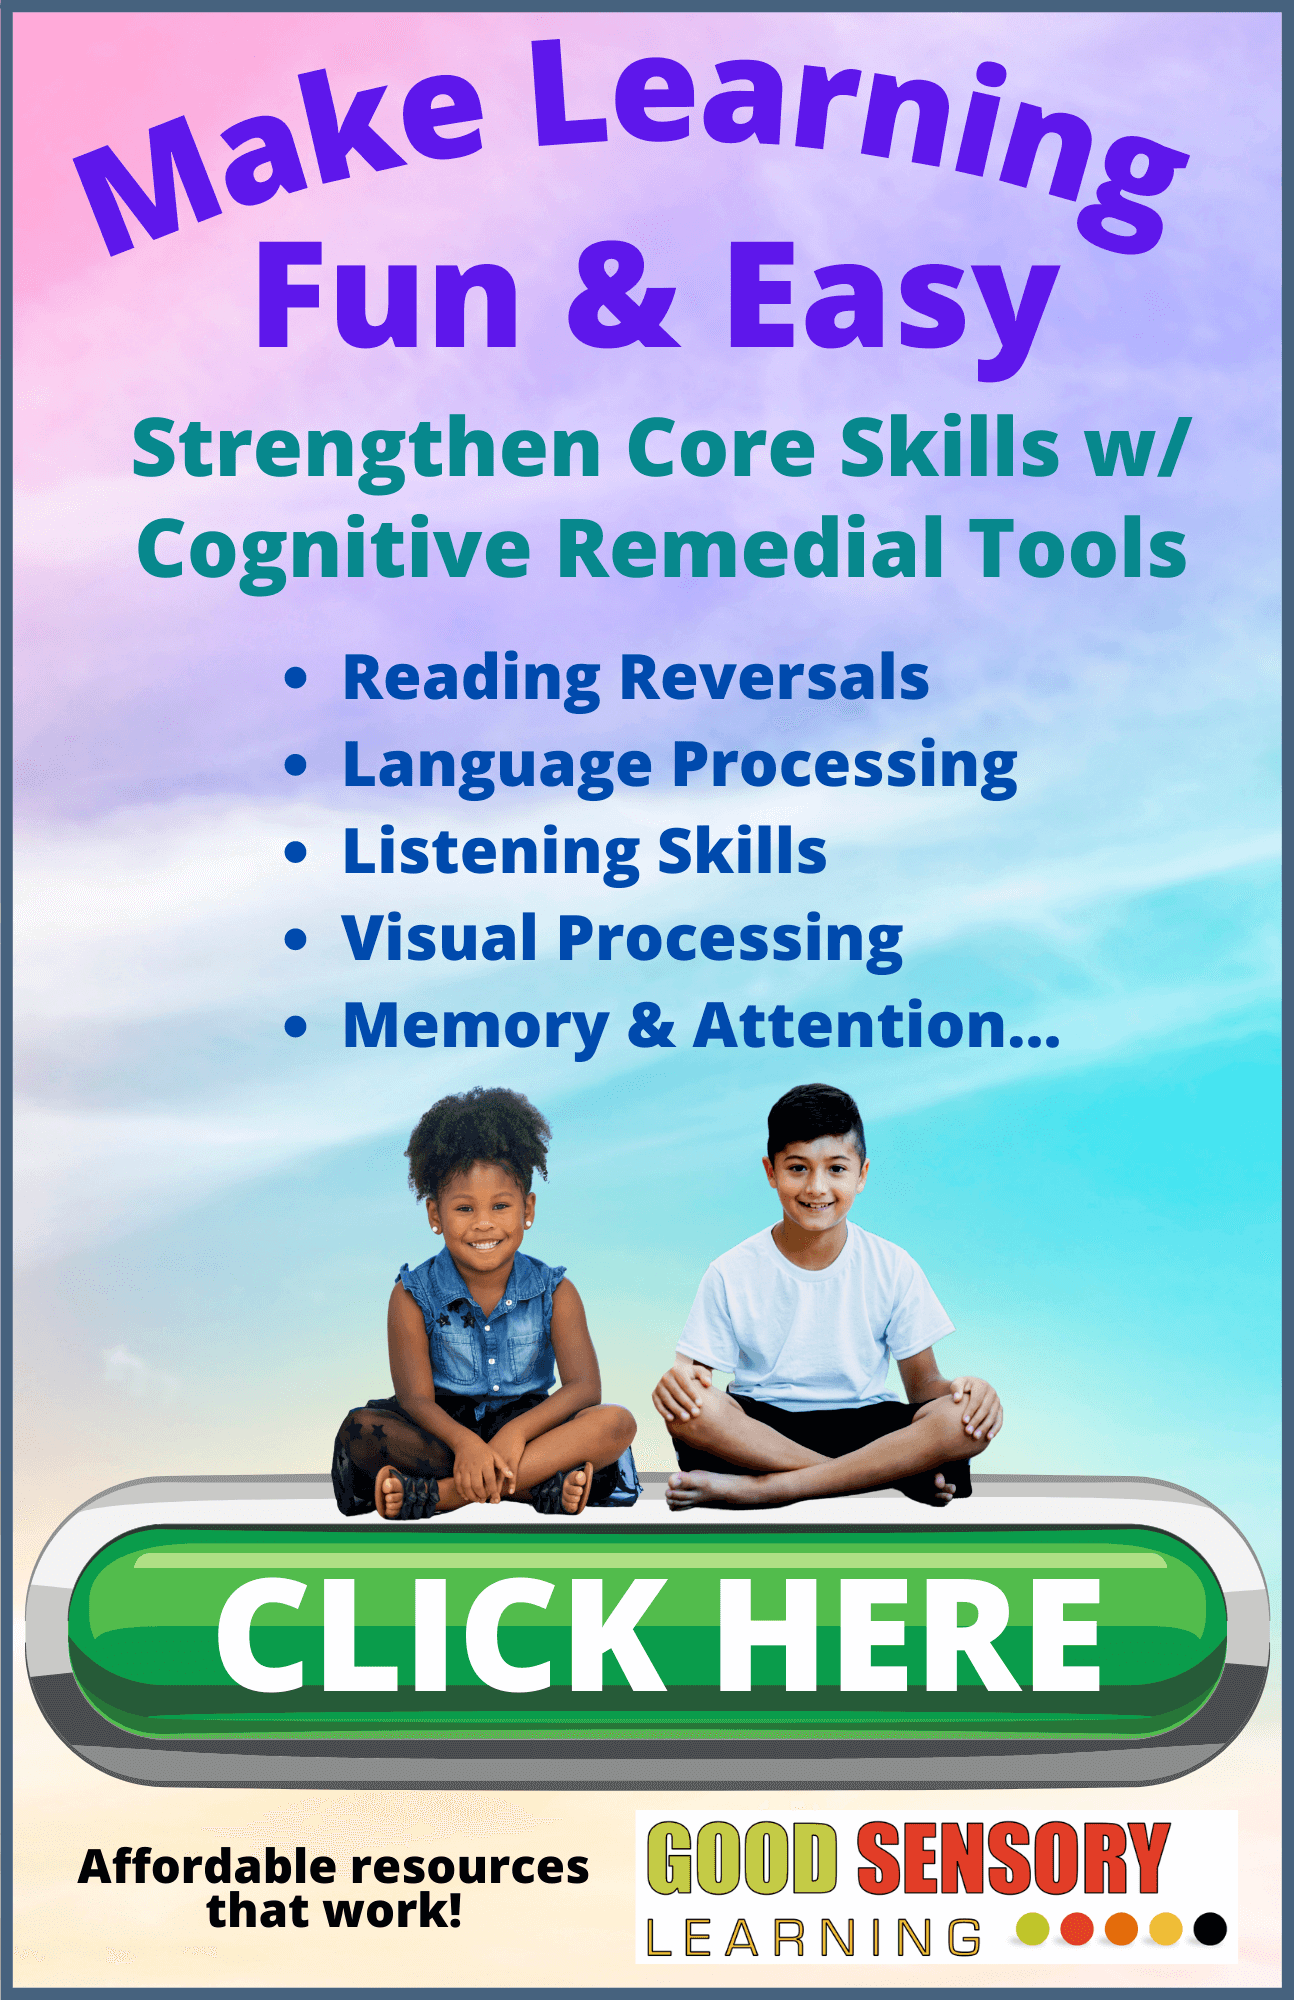 Cognitive materials for dyslexic students